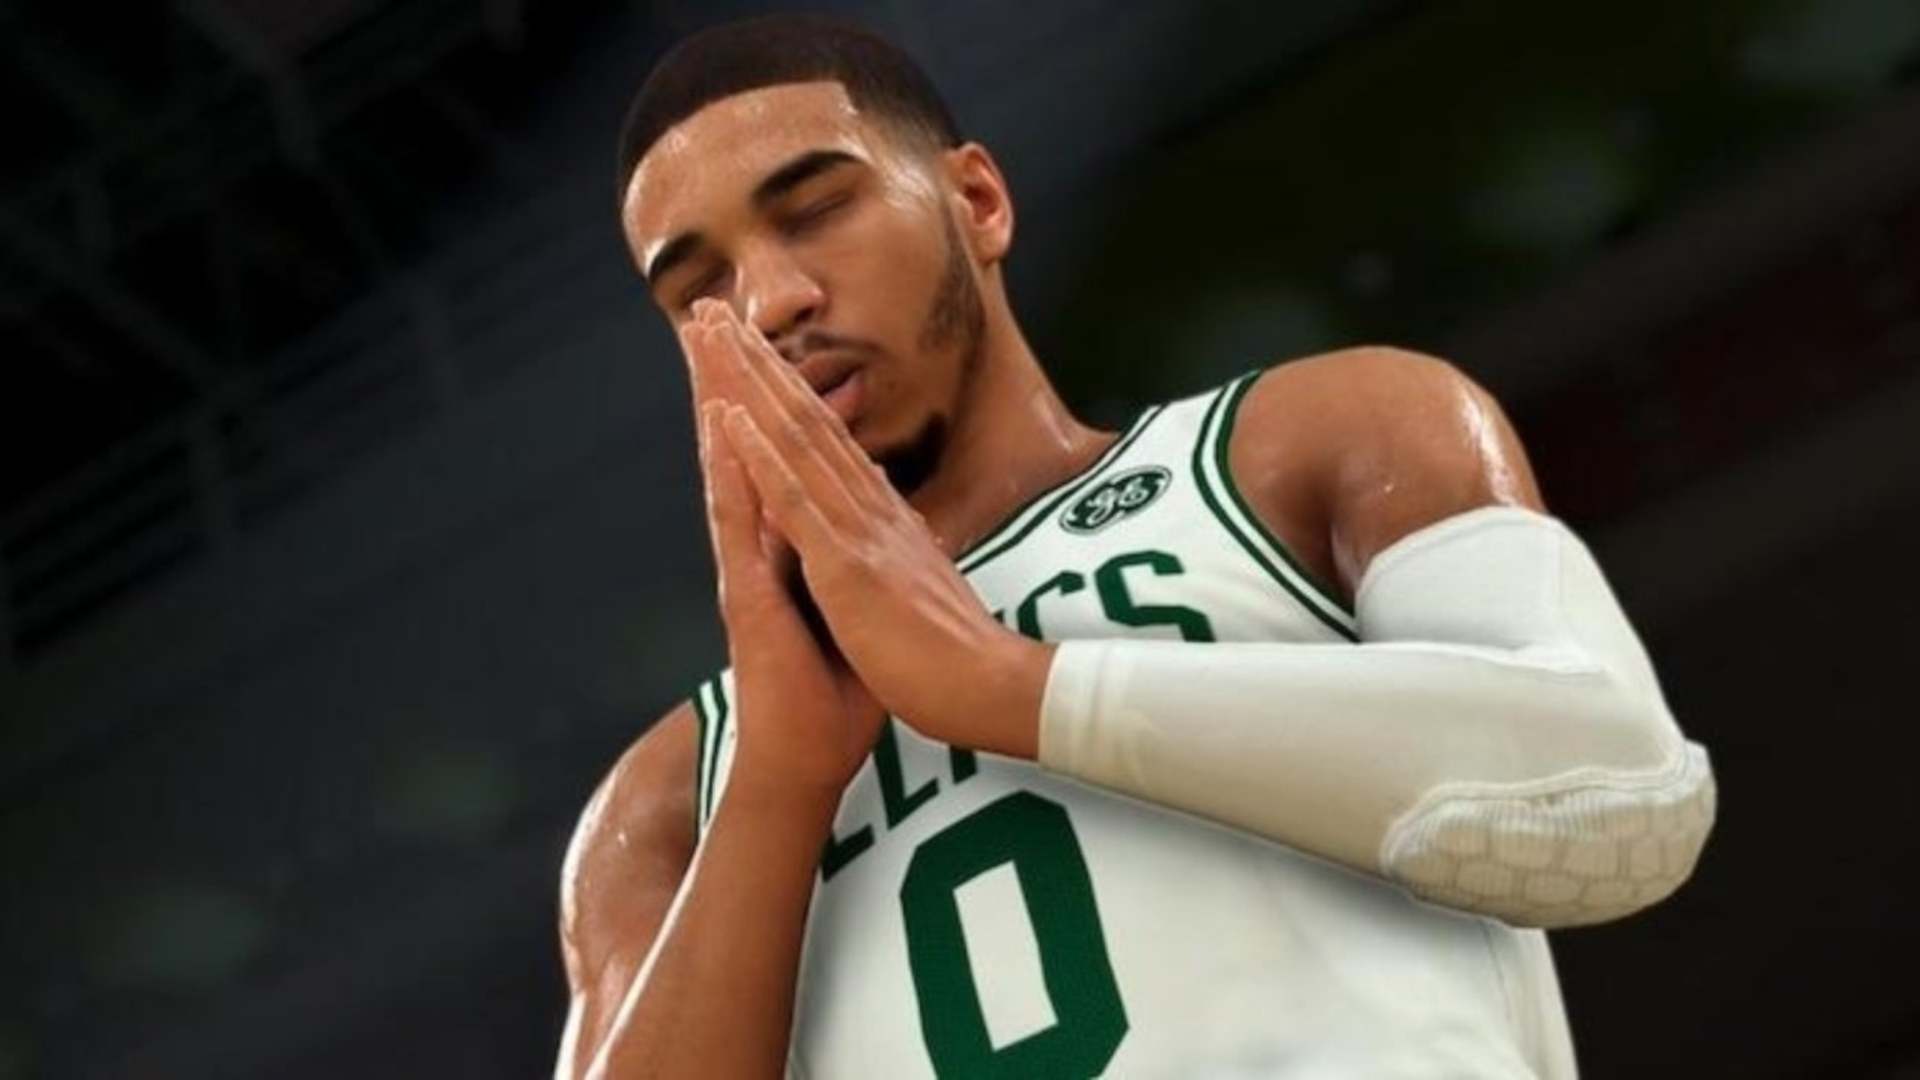 NBA 2K20 Finally Tackles the VC Microtransaction Grind: We Didn't Want People to Feel [.] Trapped in This Grind Anymore